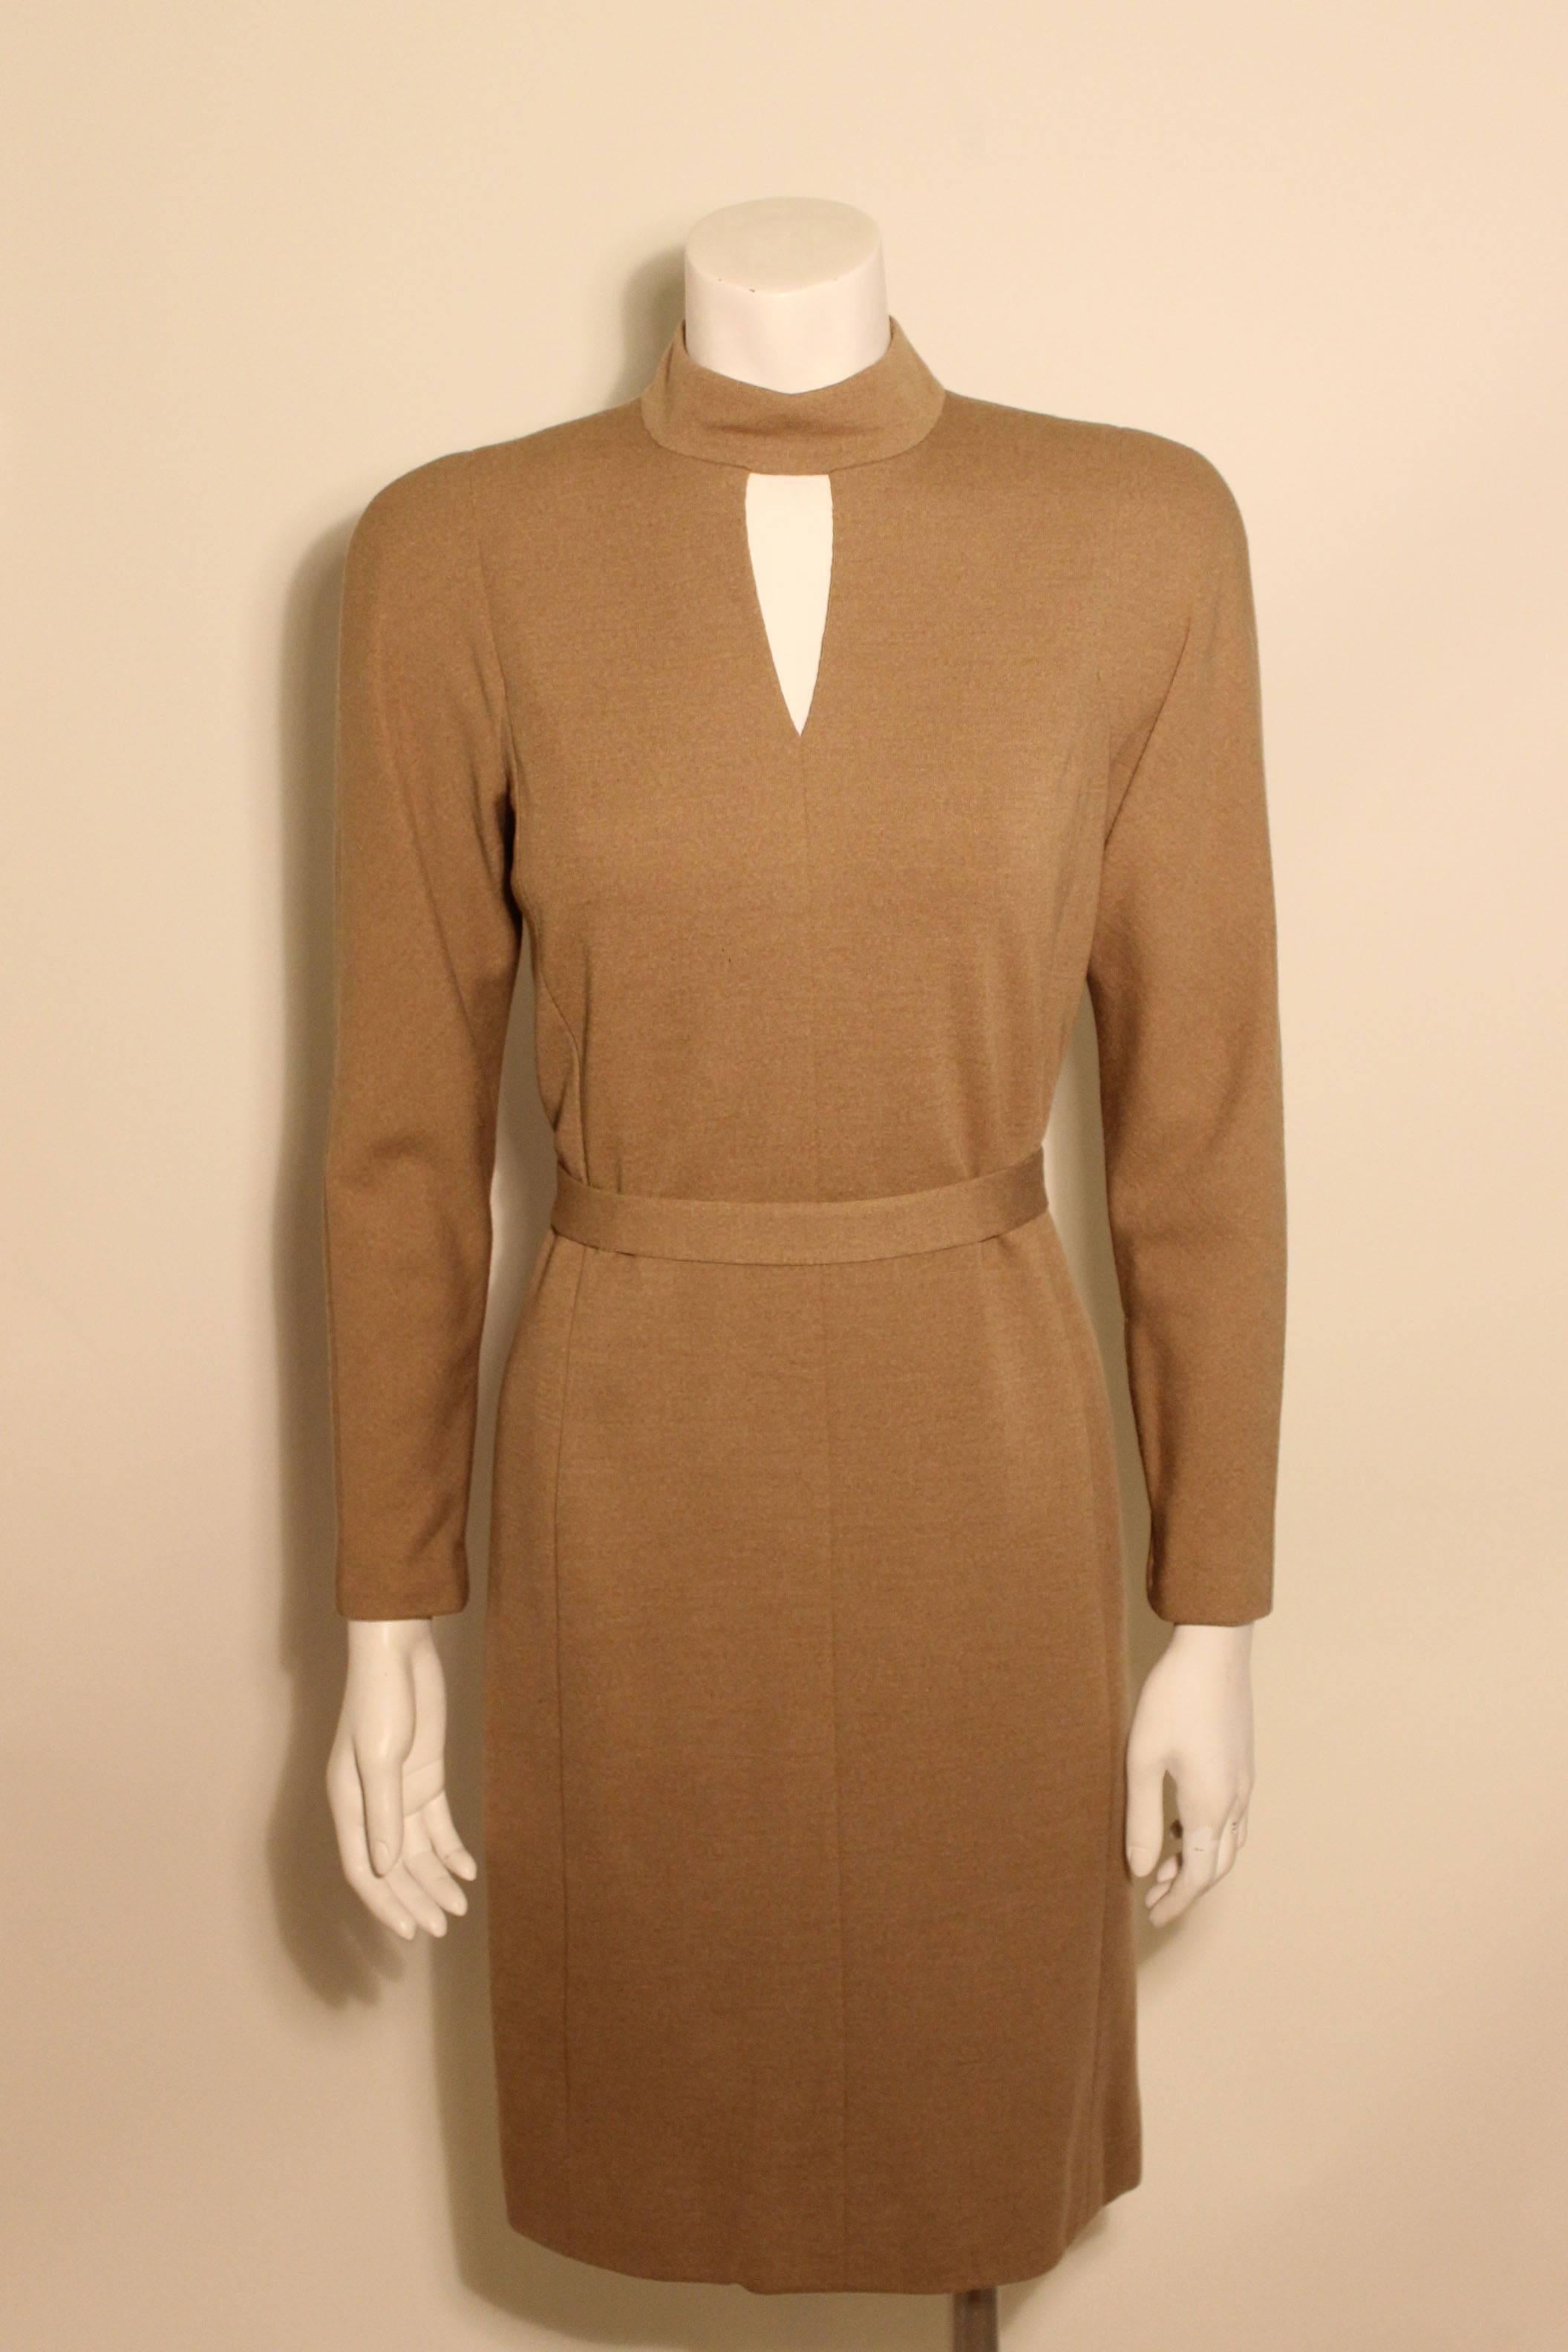 Vintage Pauline Trigere fine wool knit taupe sheath dress featuring a keyhole neckline and zippered sleeves. There is a detached belt that can be used to cinch the waist. The dress has a full silk lining. 